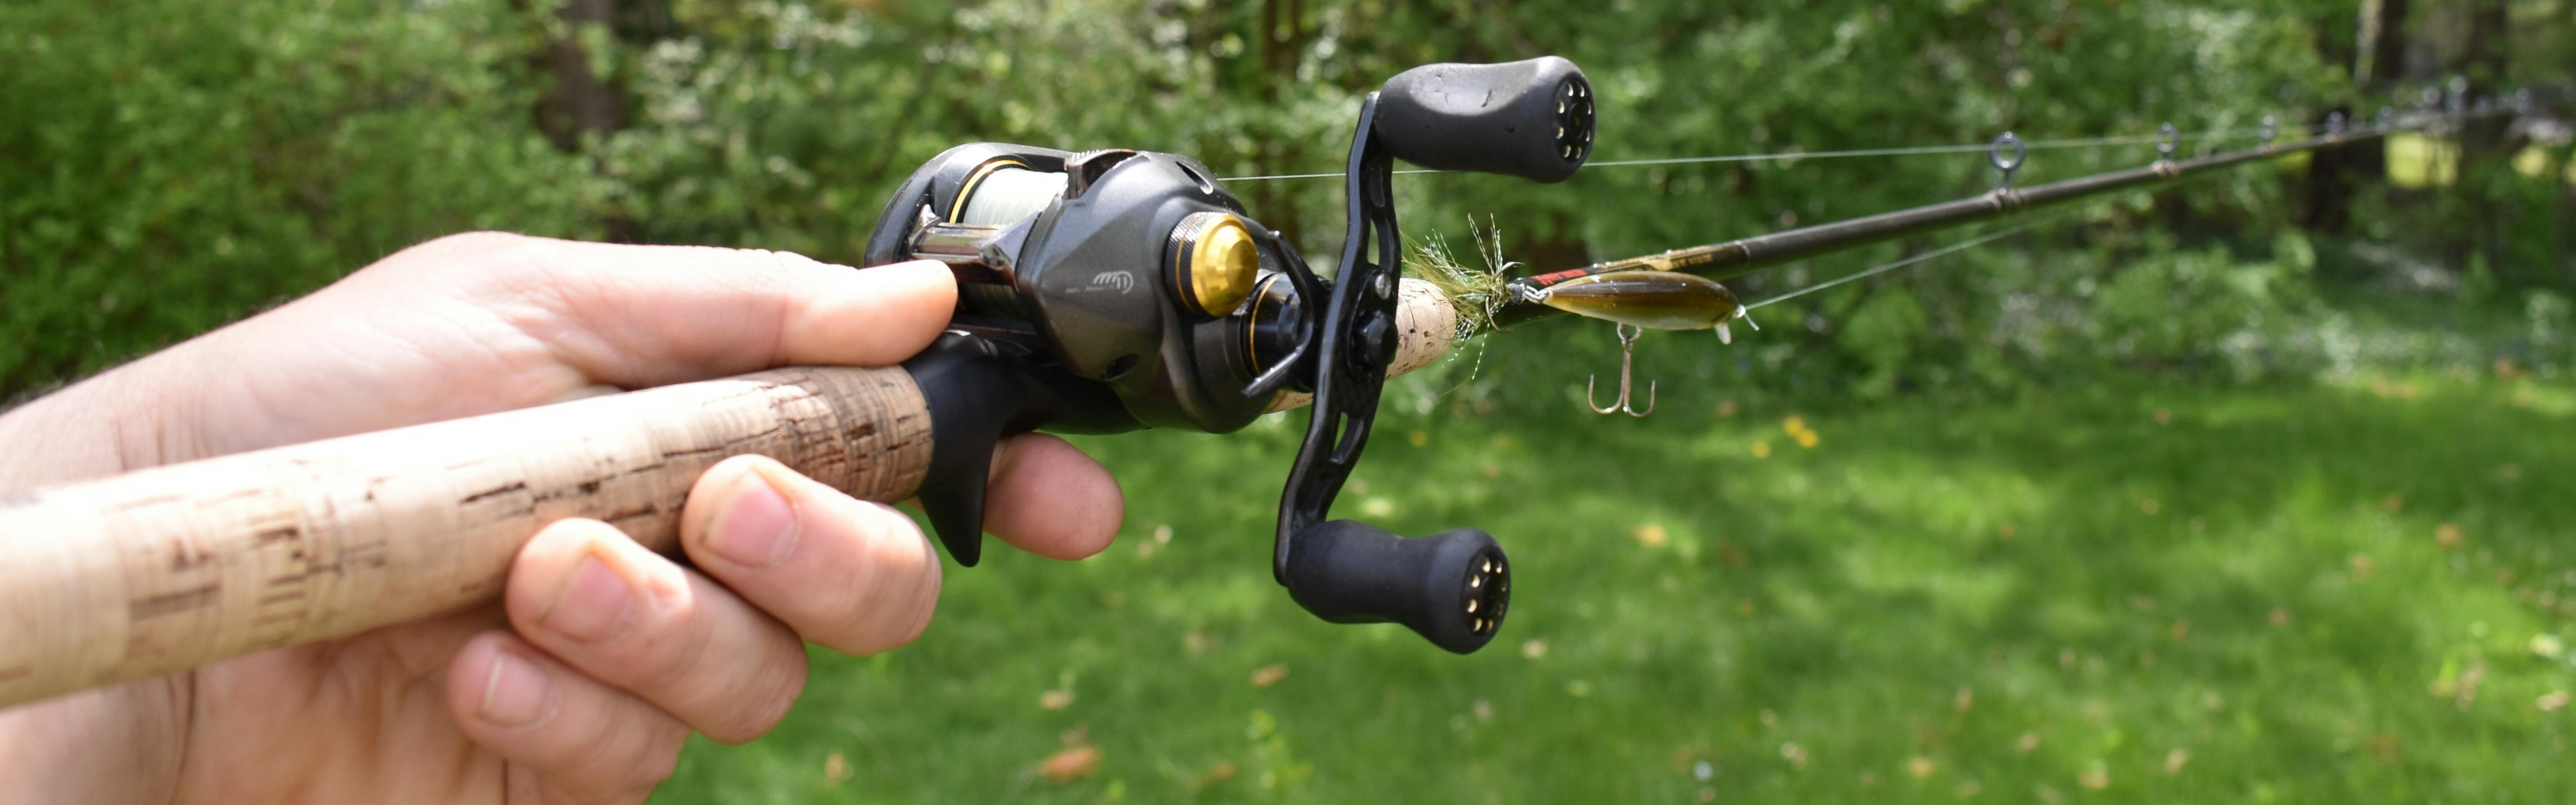 Mastering Your Baitcaster Guide On How To Cast A Baitcaster Reel With